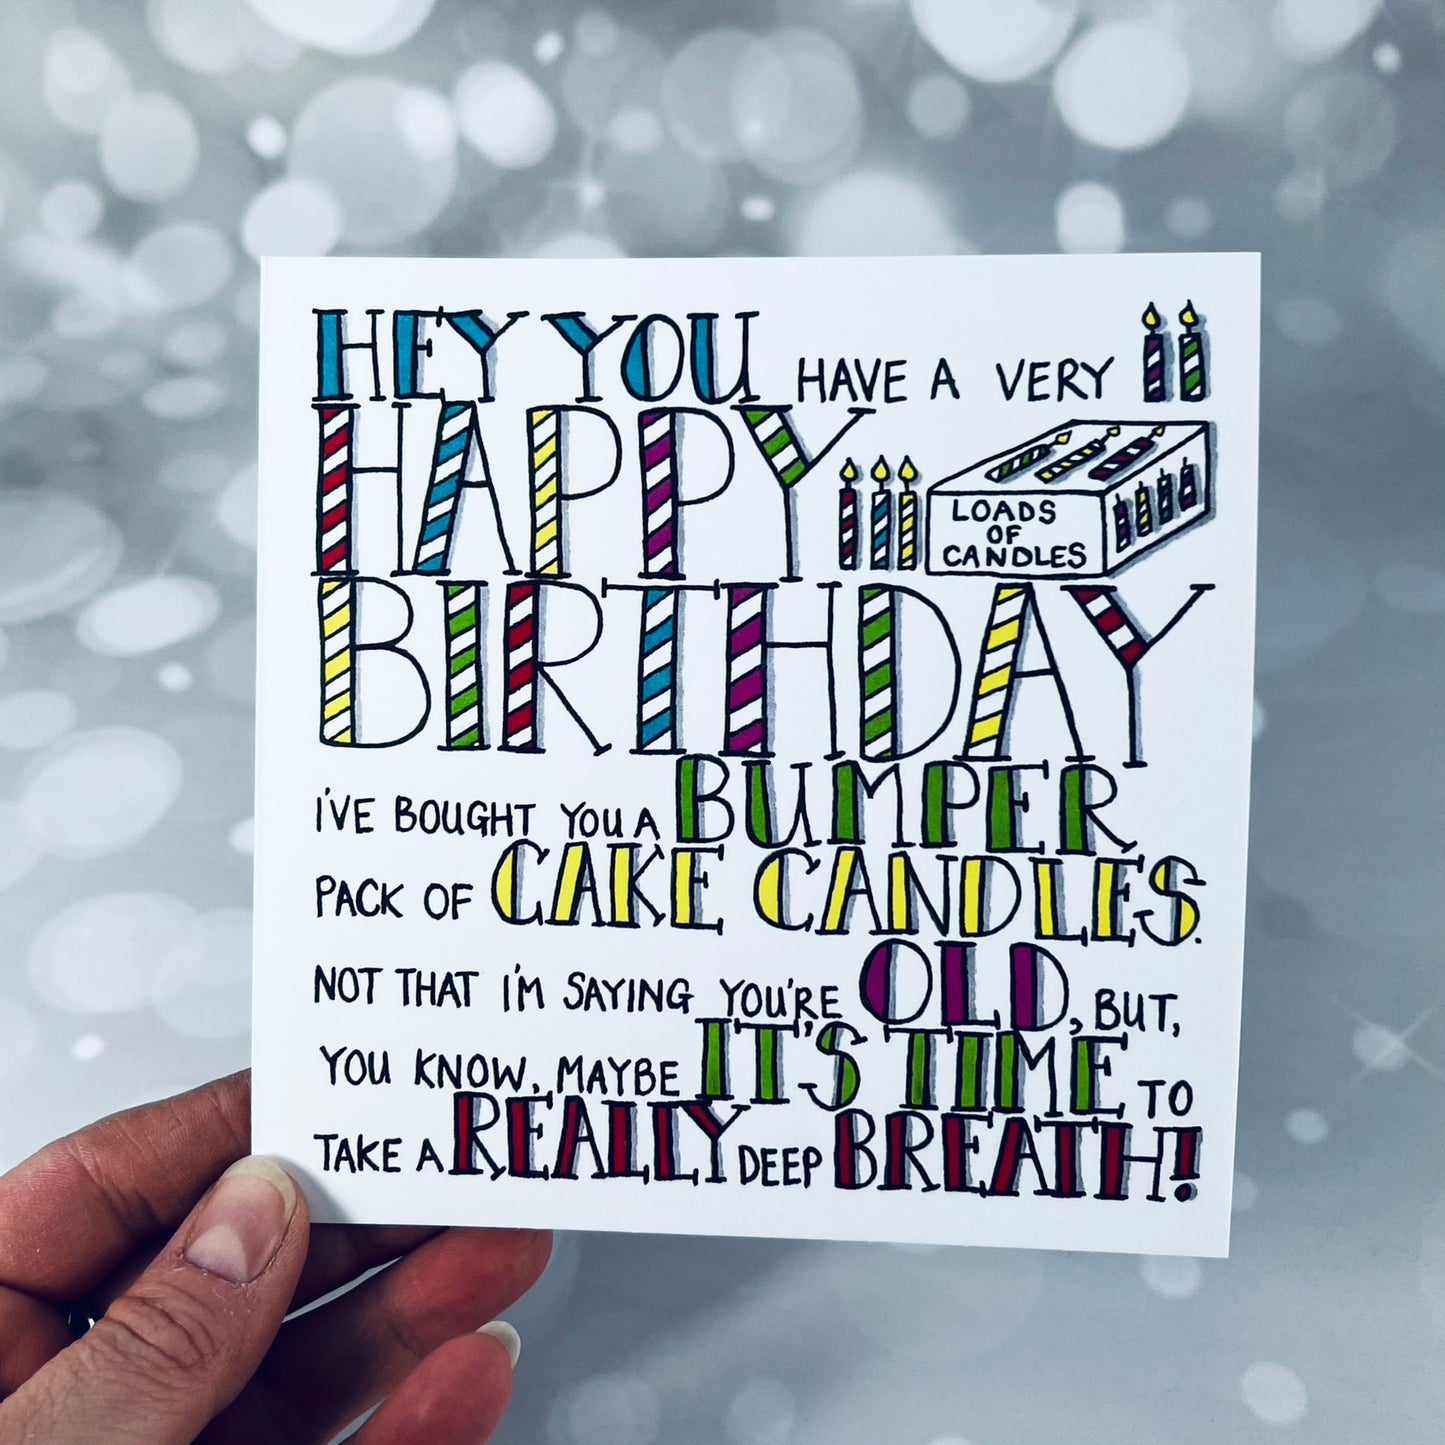 Fun Birthday Cards For Her | Cool Birthday Cards